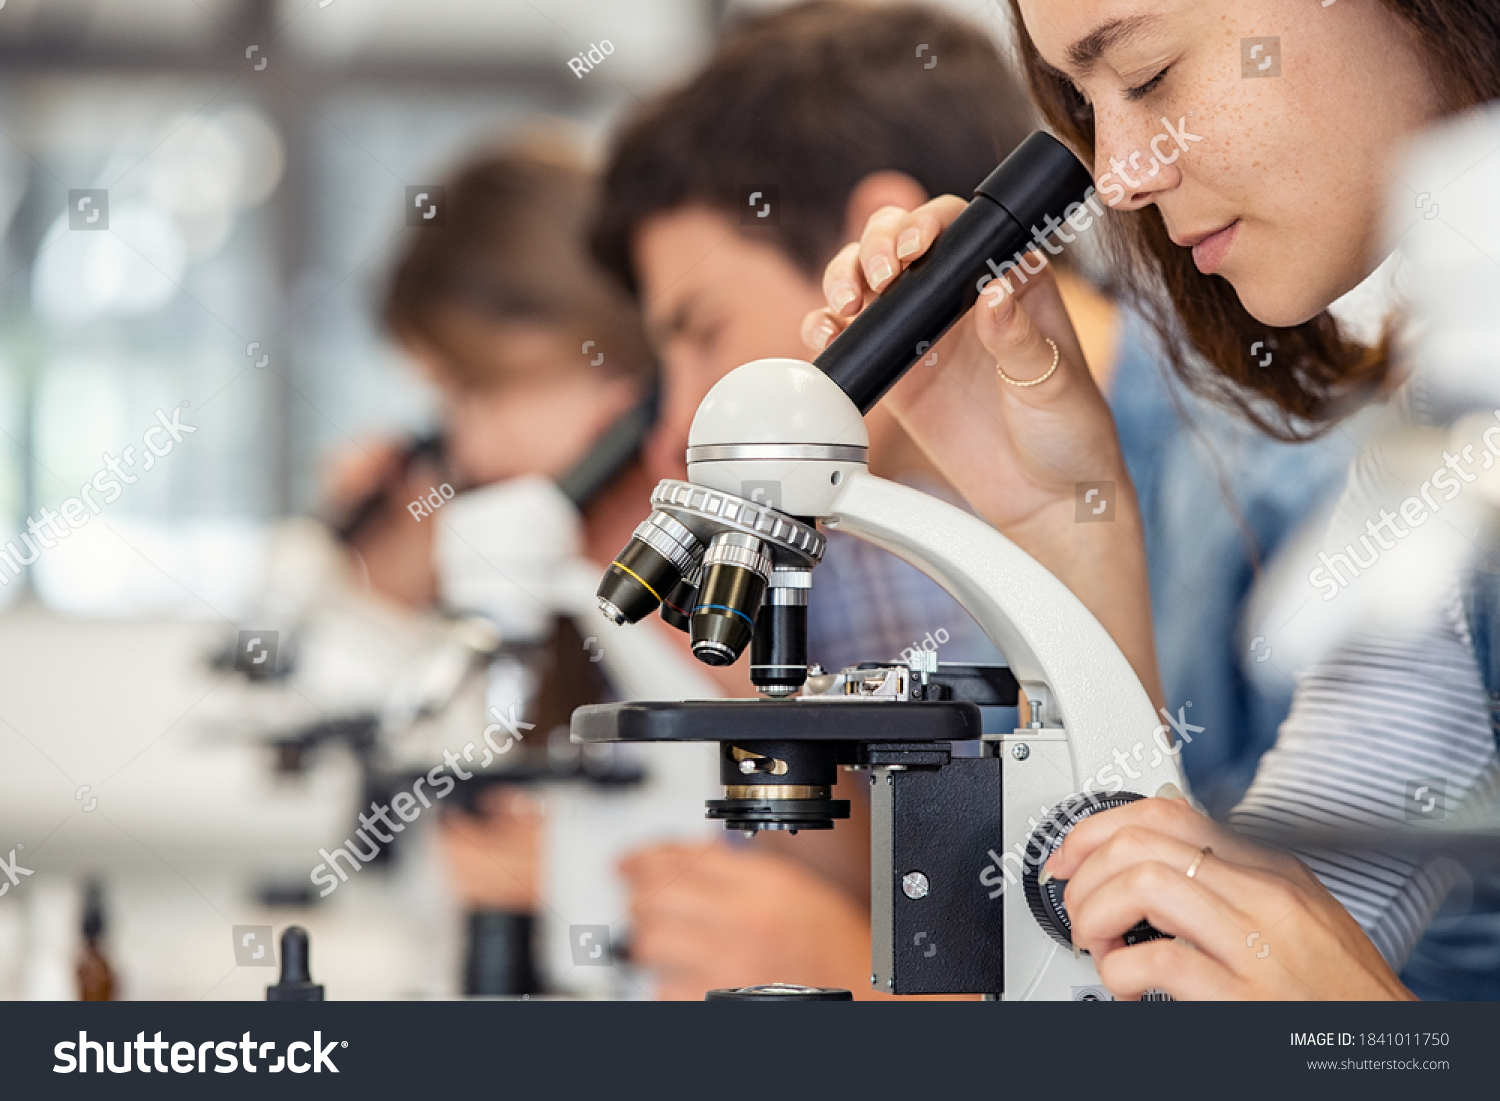 Close up of young woman seeing through microscope in science laboratory with other students. Focused college student using microscope in the chemistry lab during biology lesson. #1841011750